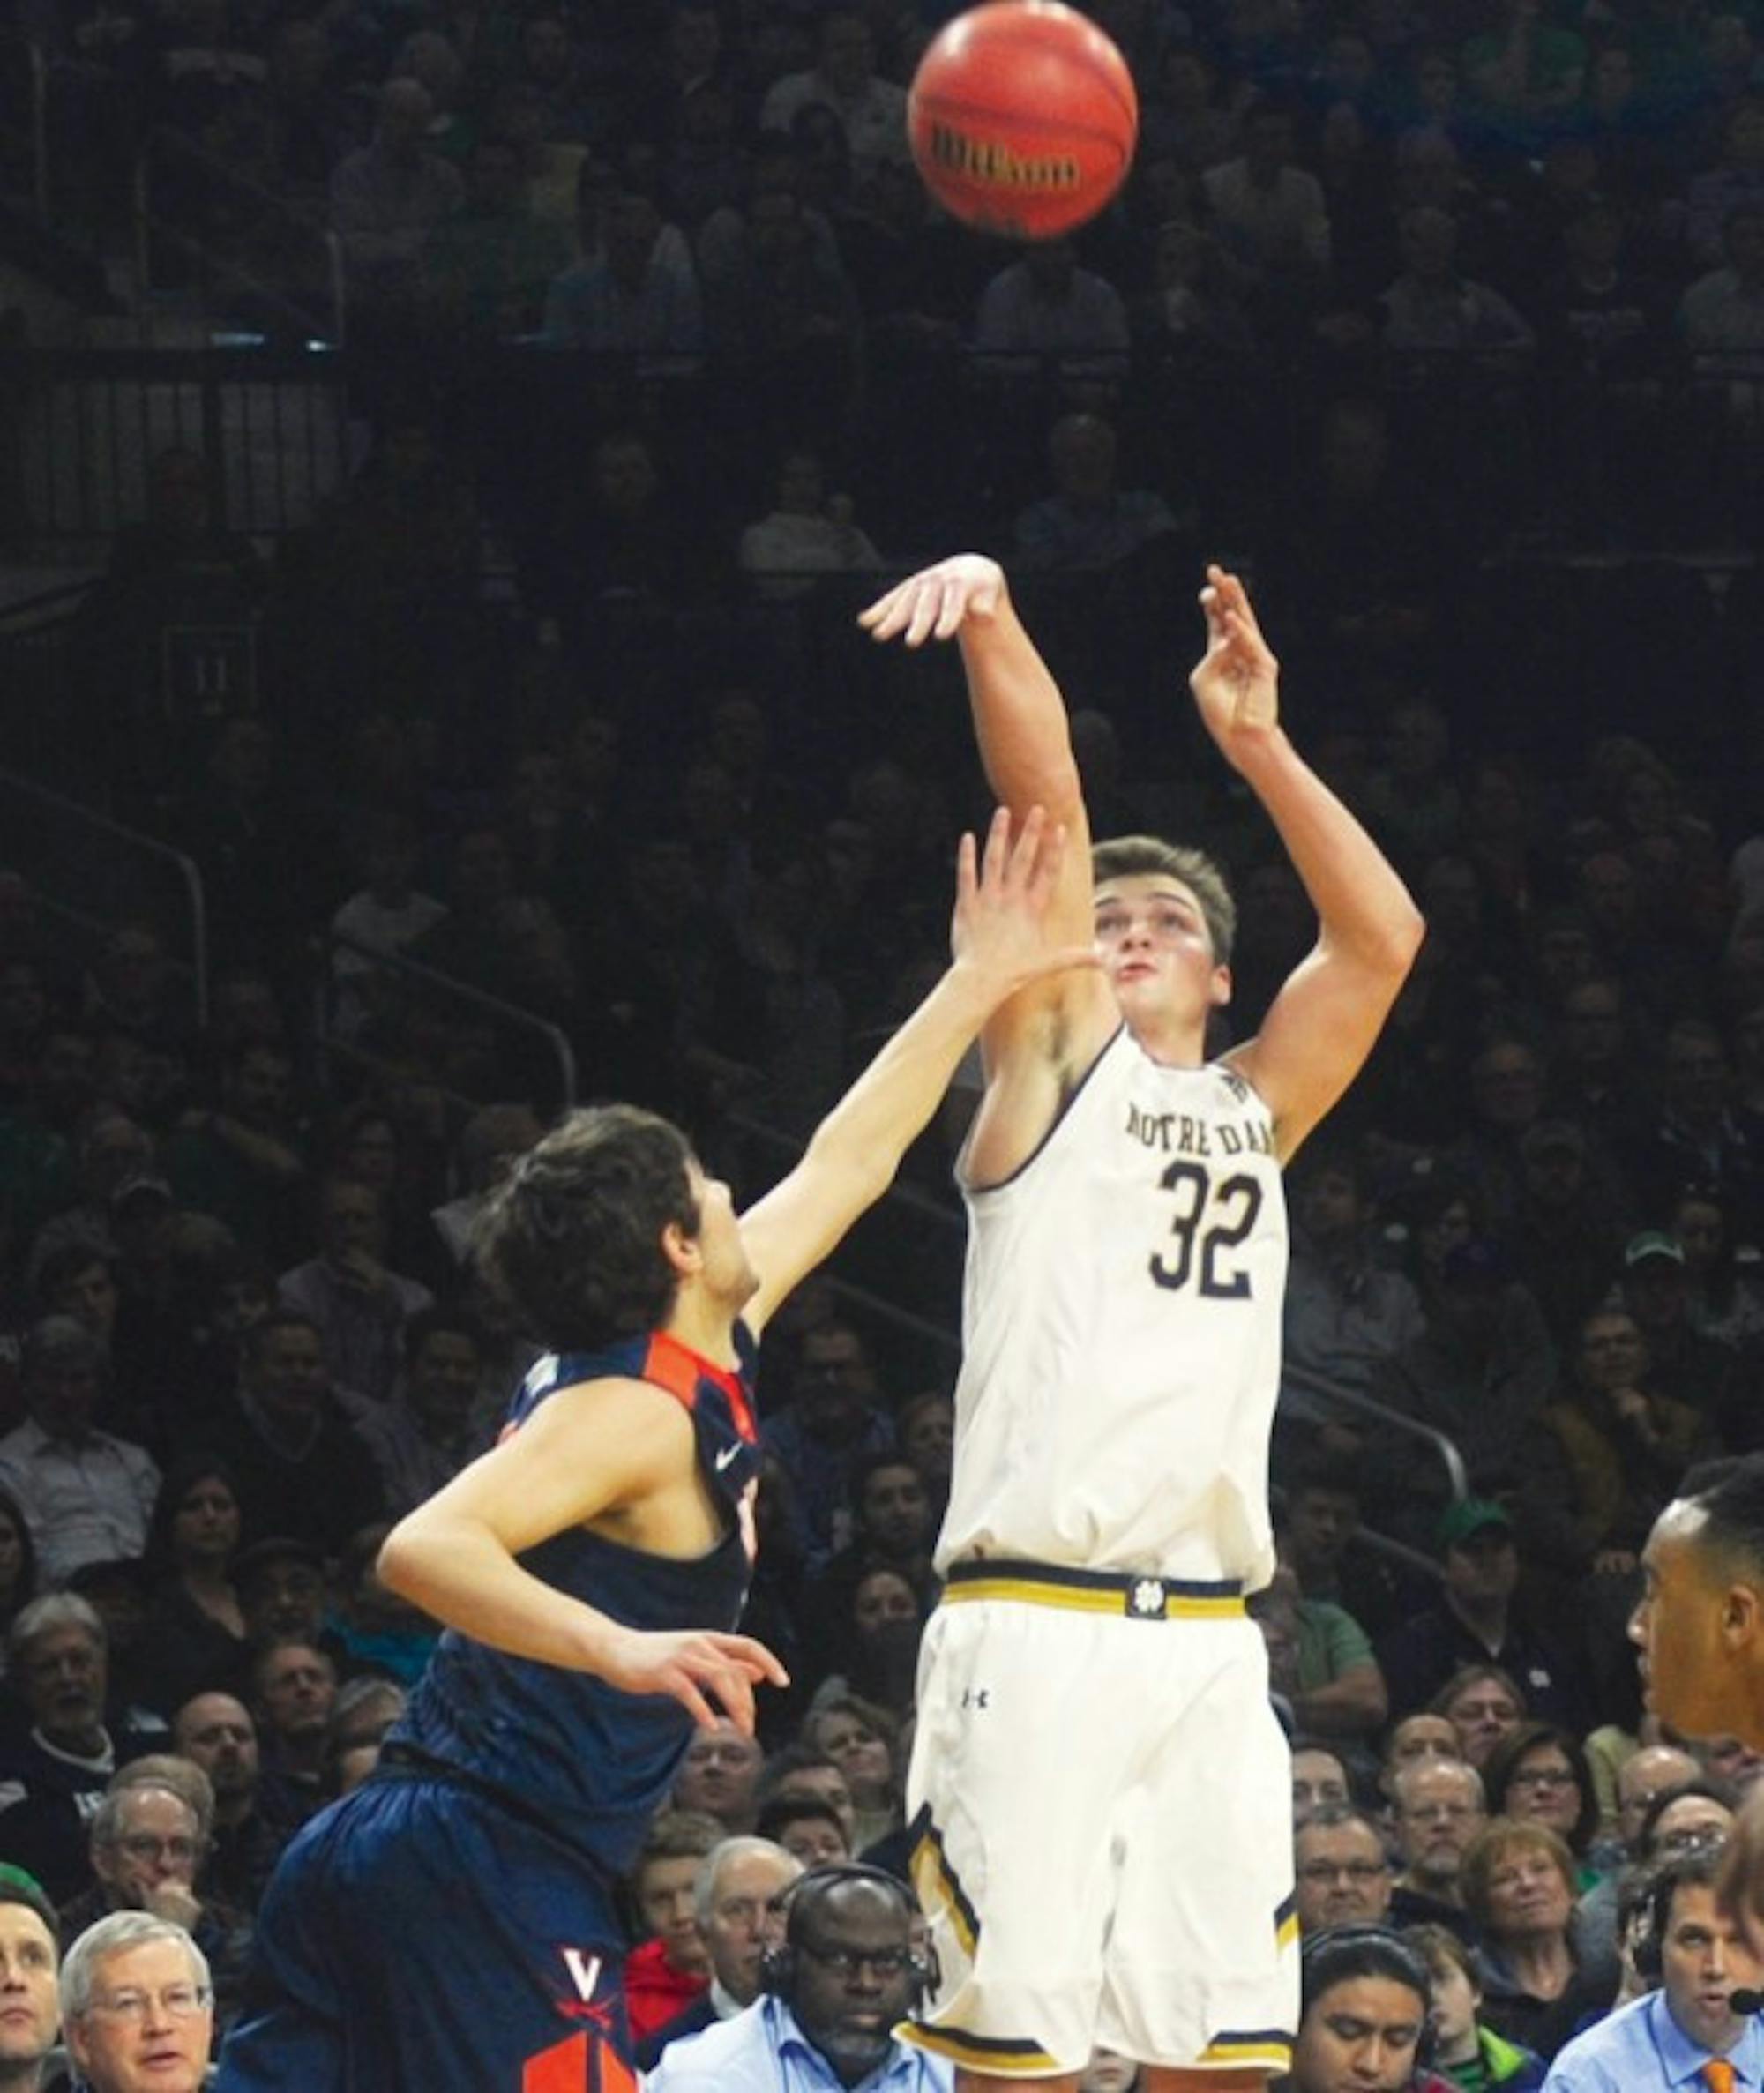 Irish senior guard Steve Vasturia launches a jumper during Notre Dame’s 71-54 loss to Virginia on Tuesday at Purcell Pavilion.